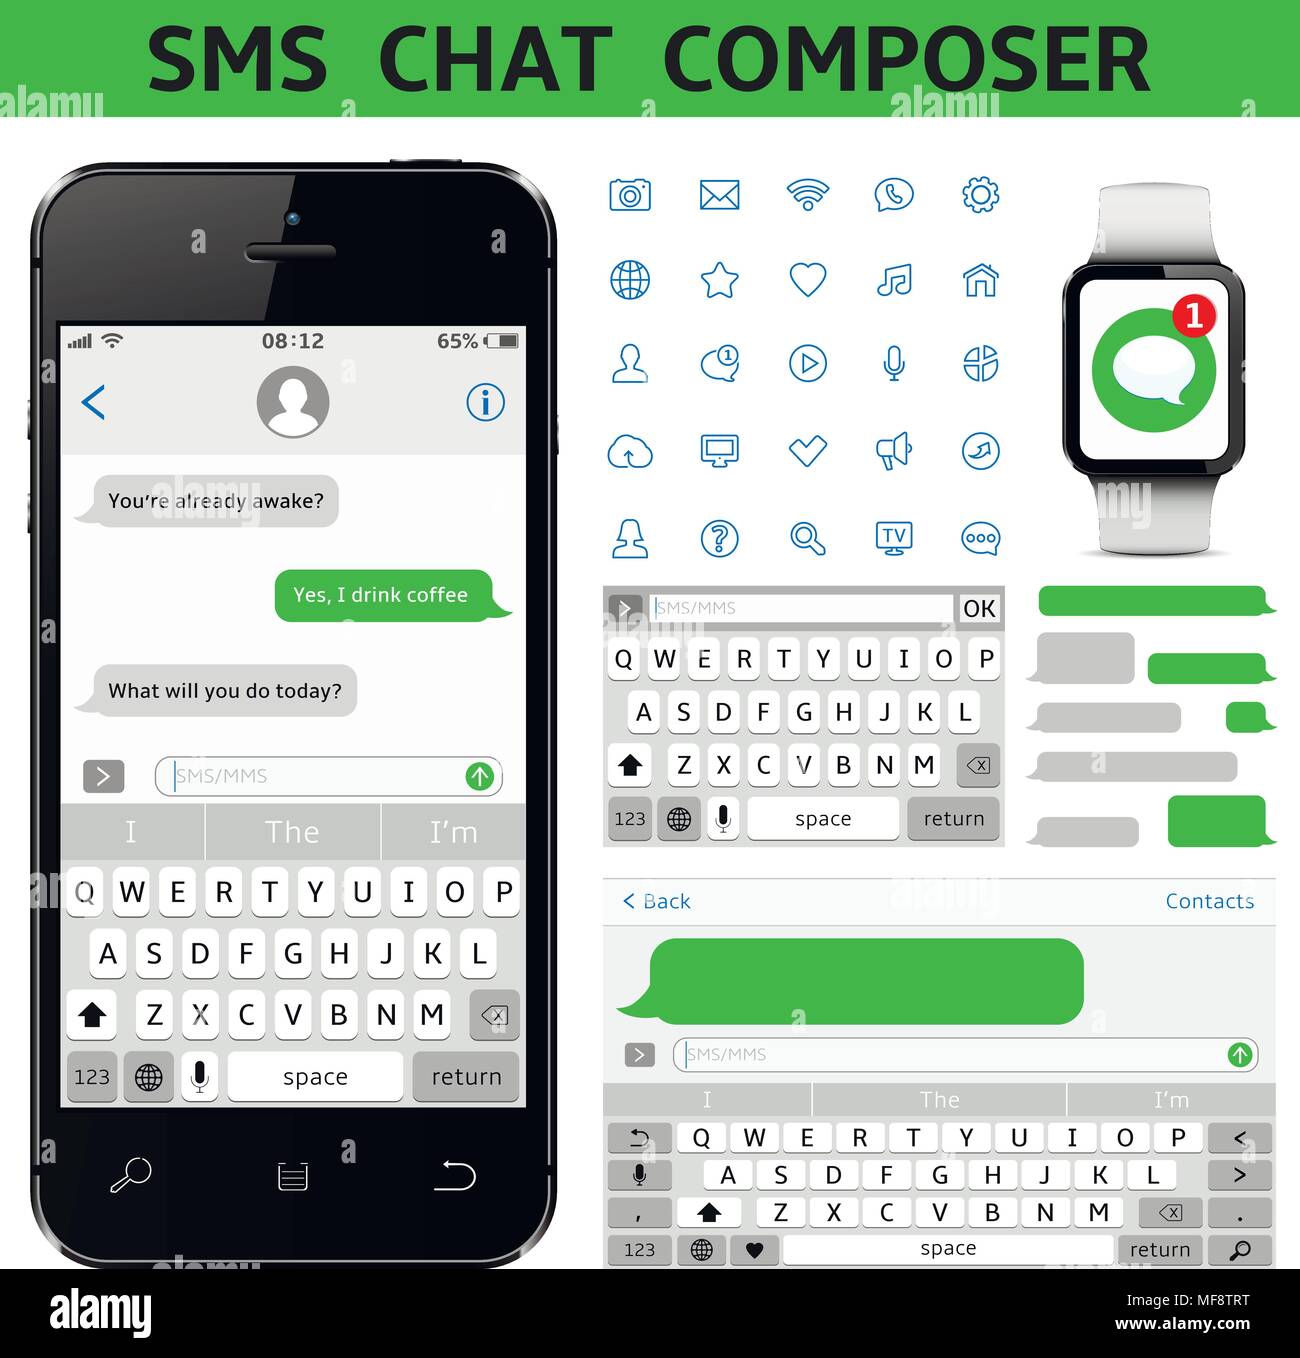 Sms chat